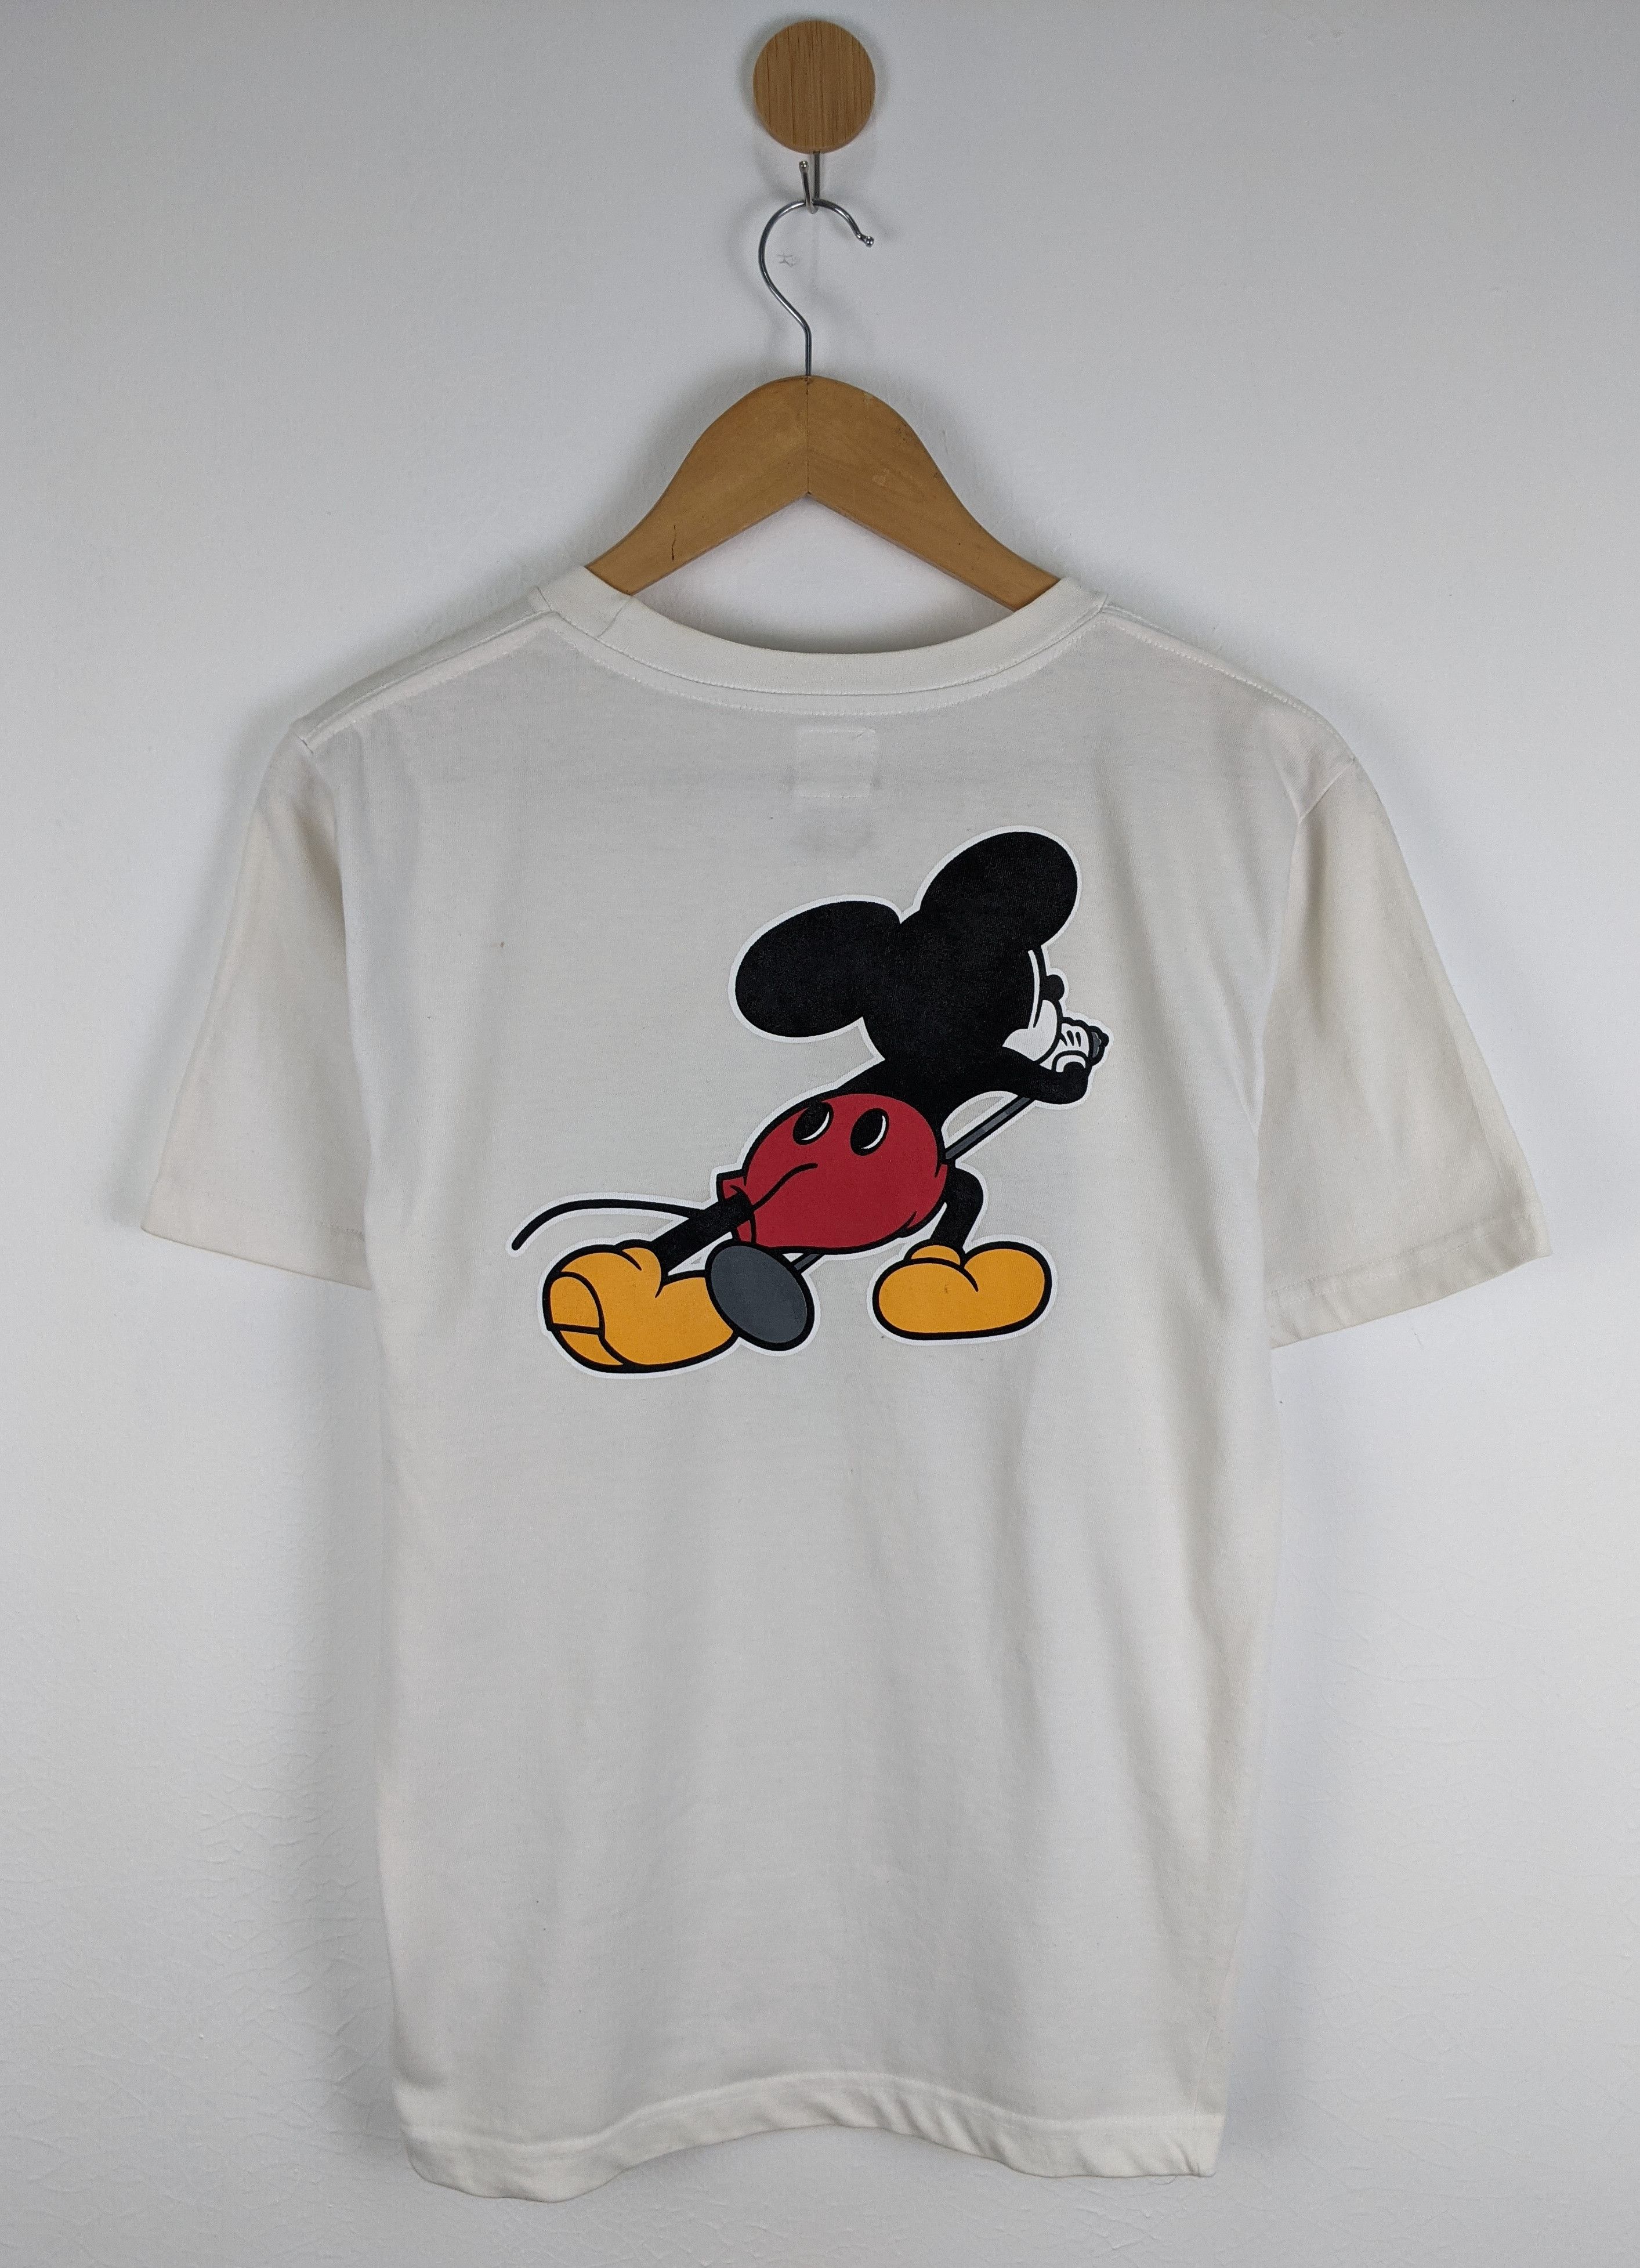 Numbernine x Mickey Mouse shirt - 2